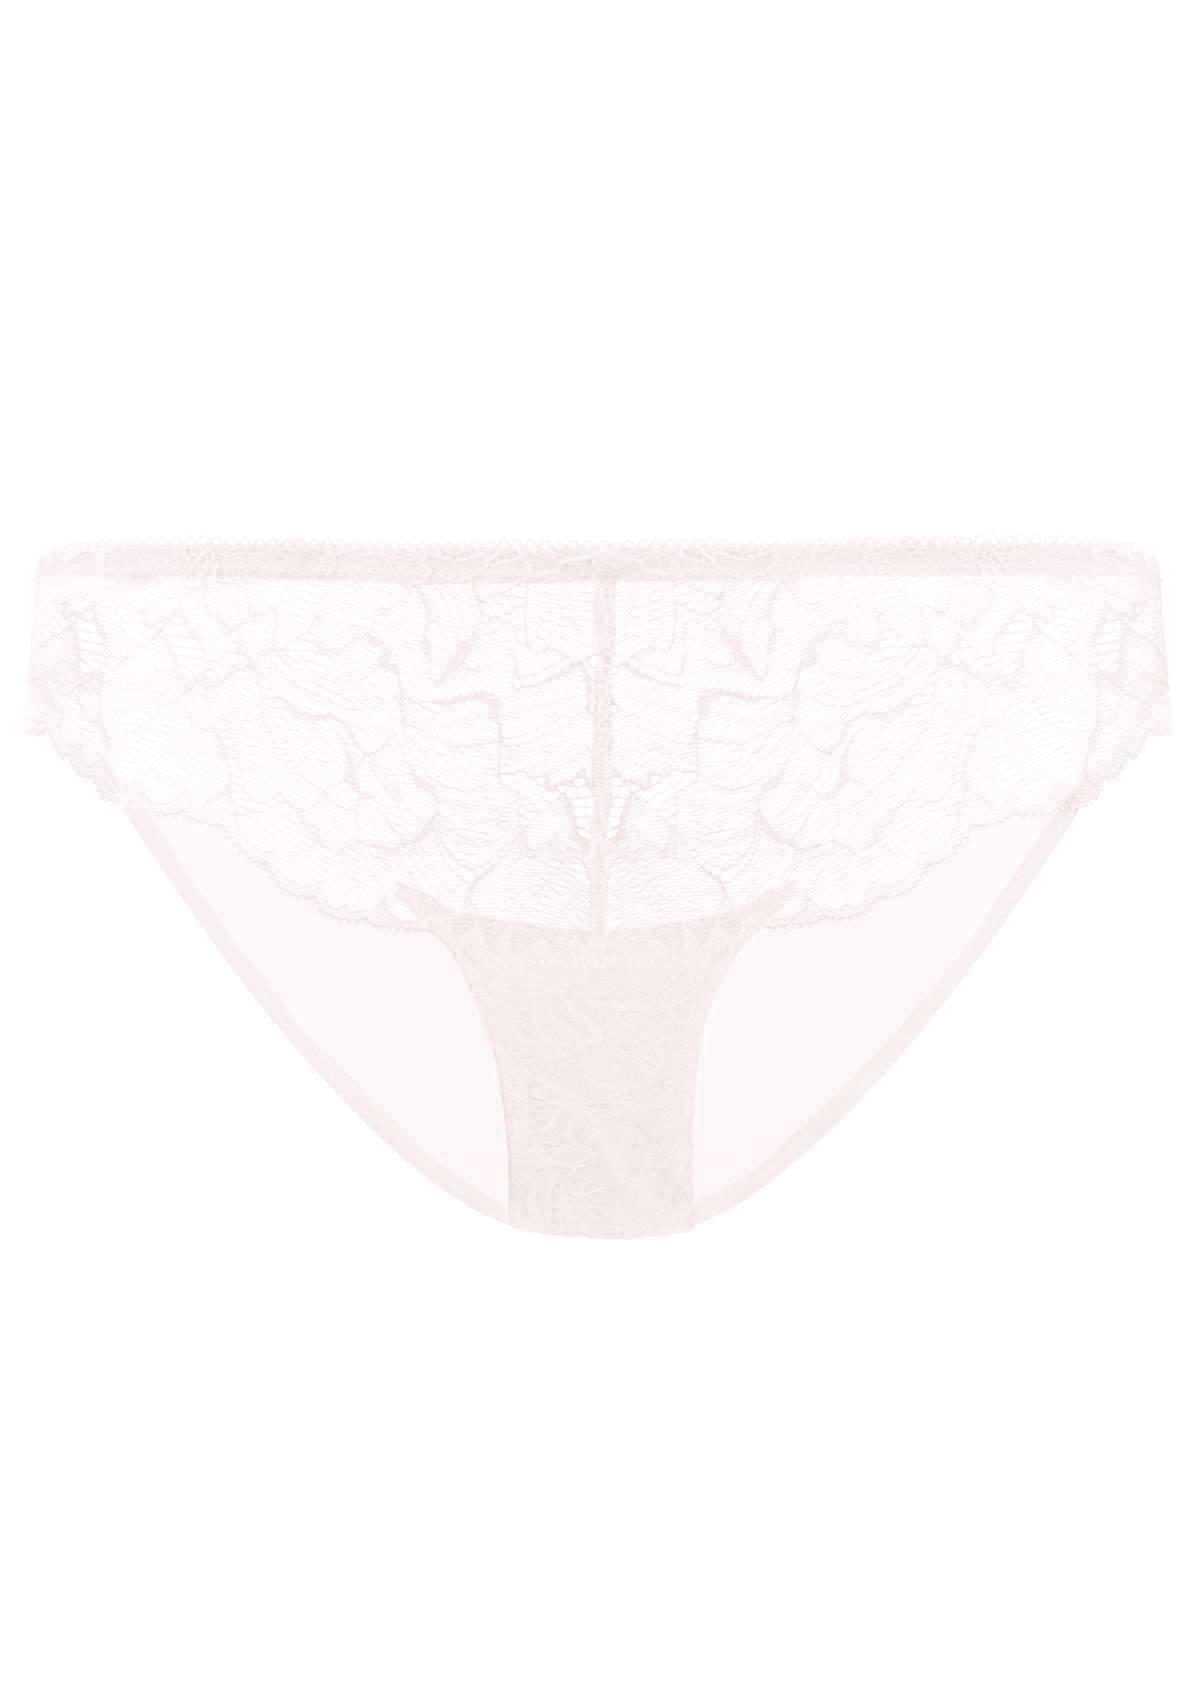 HSIA Blossom Mid-Rise Sheer Lace Lightweight Charming Feminine Pantie - M / Dusty Peach / High-Rise Brief